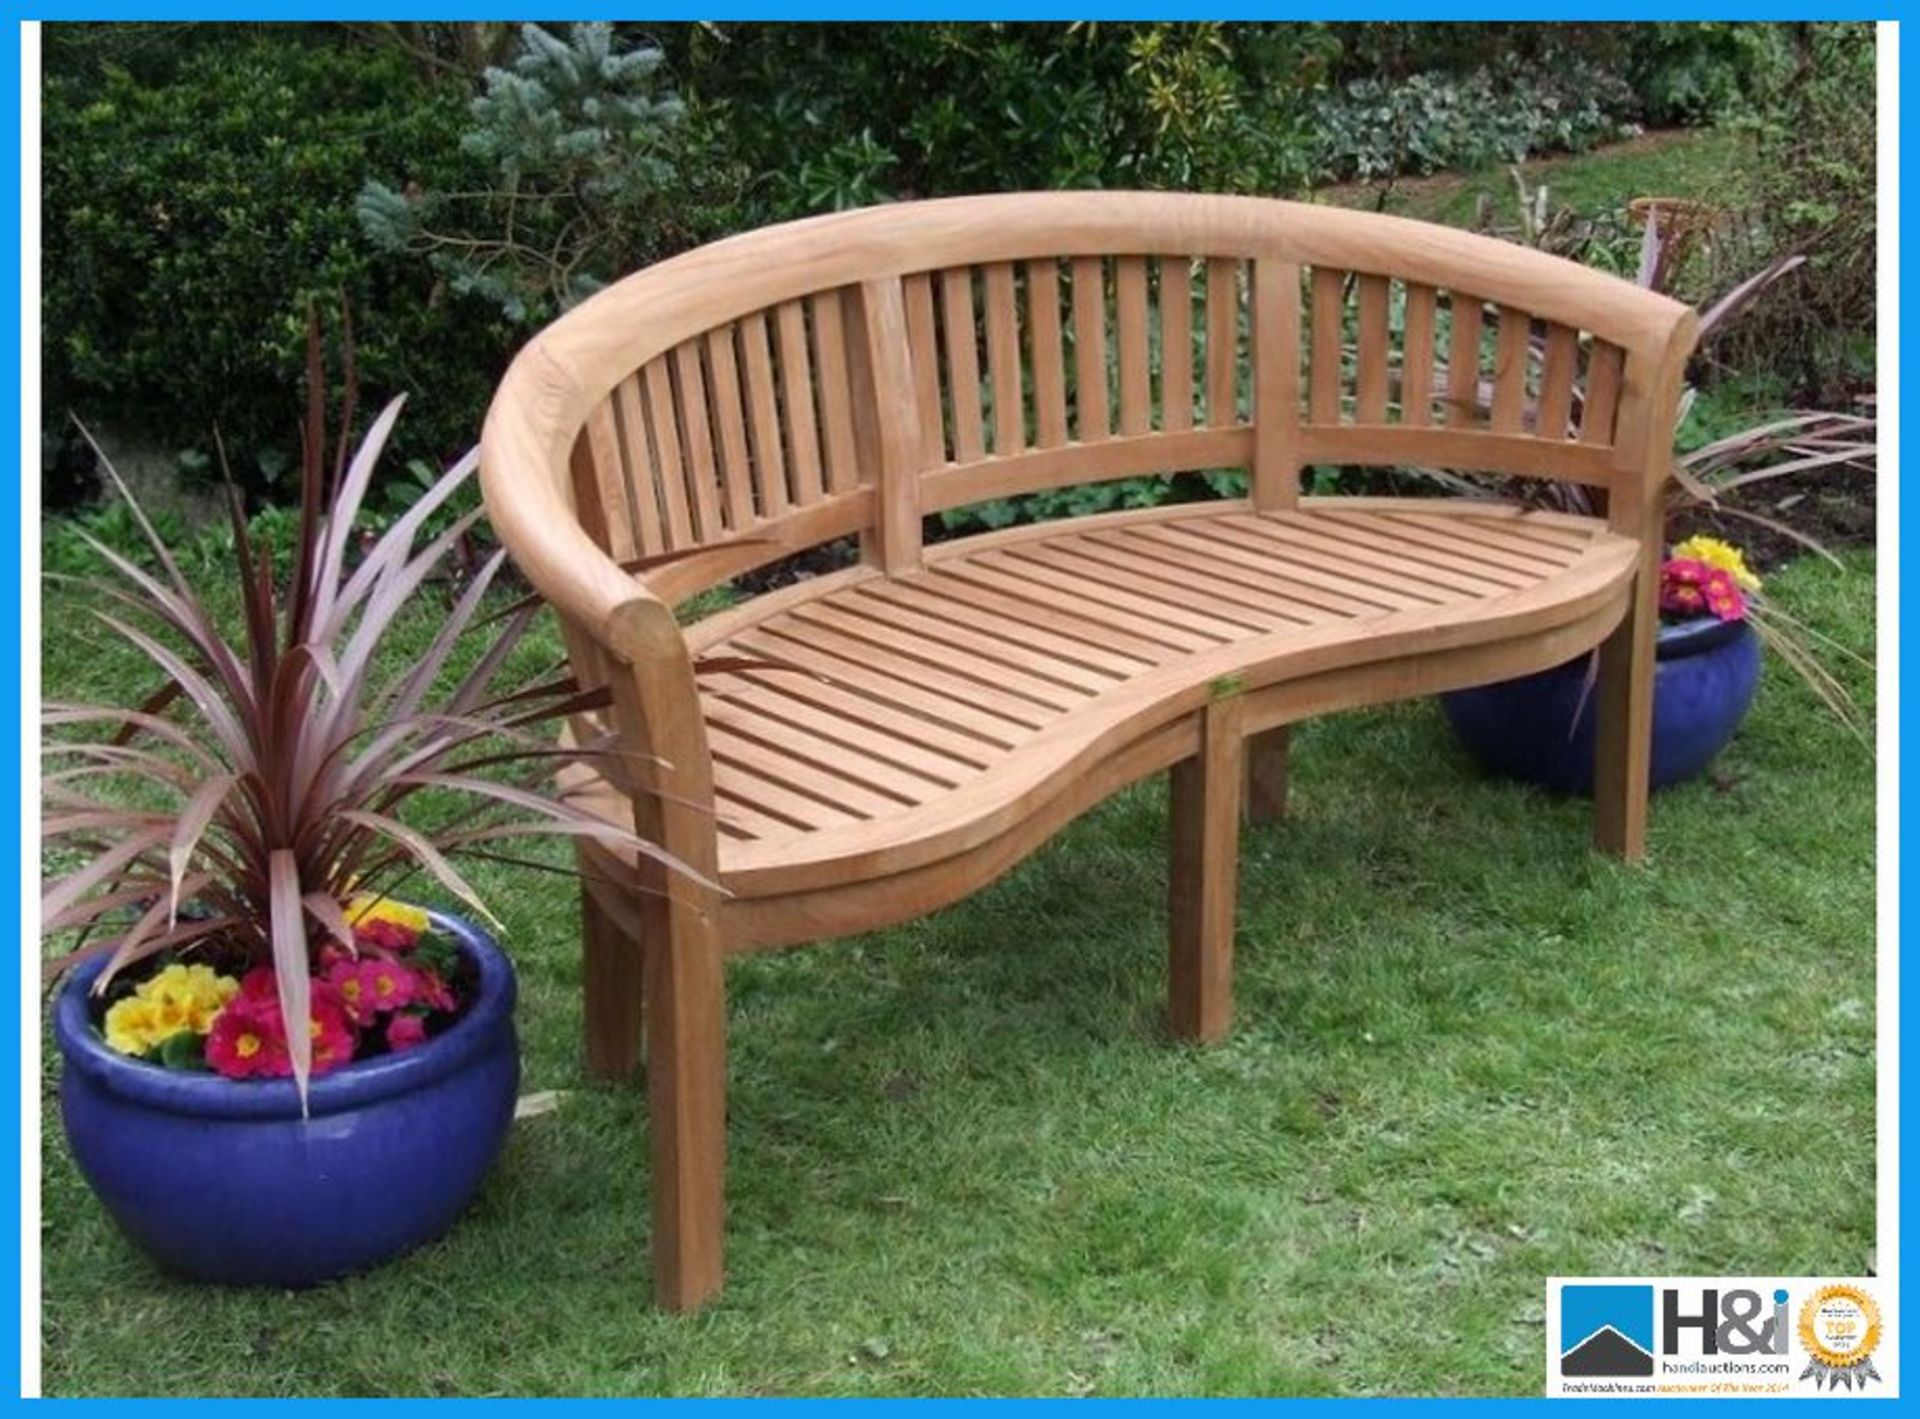 Teak Banana Bench. The Banana Bench is loved by our customers due to its unique shape and amazing